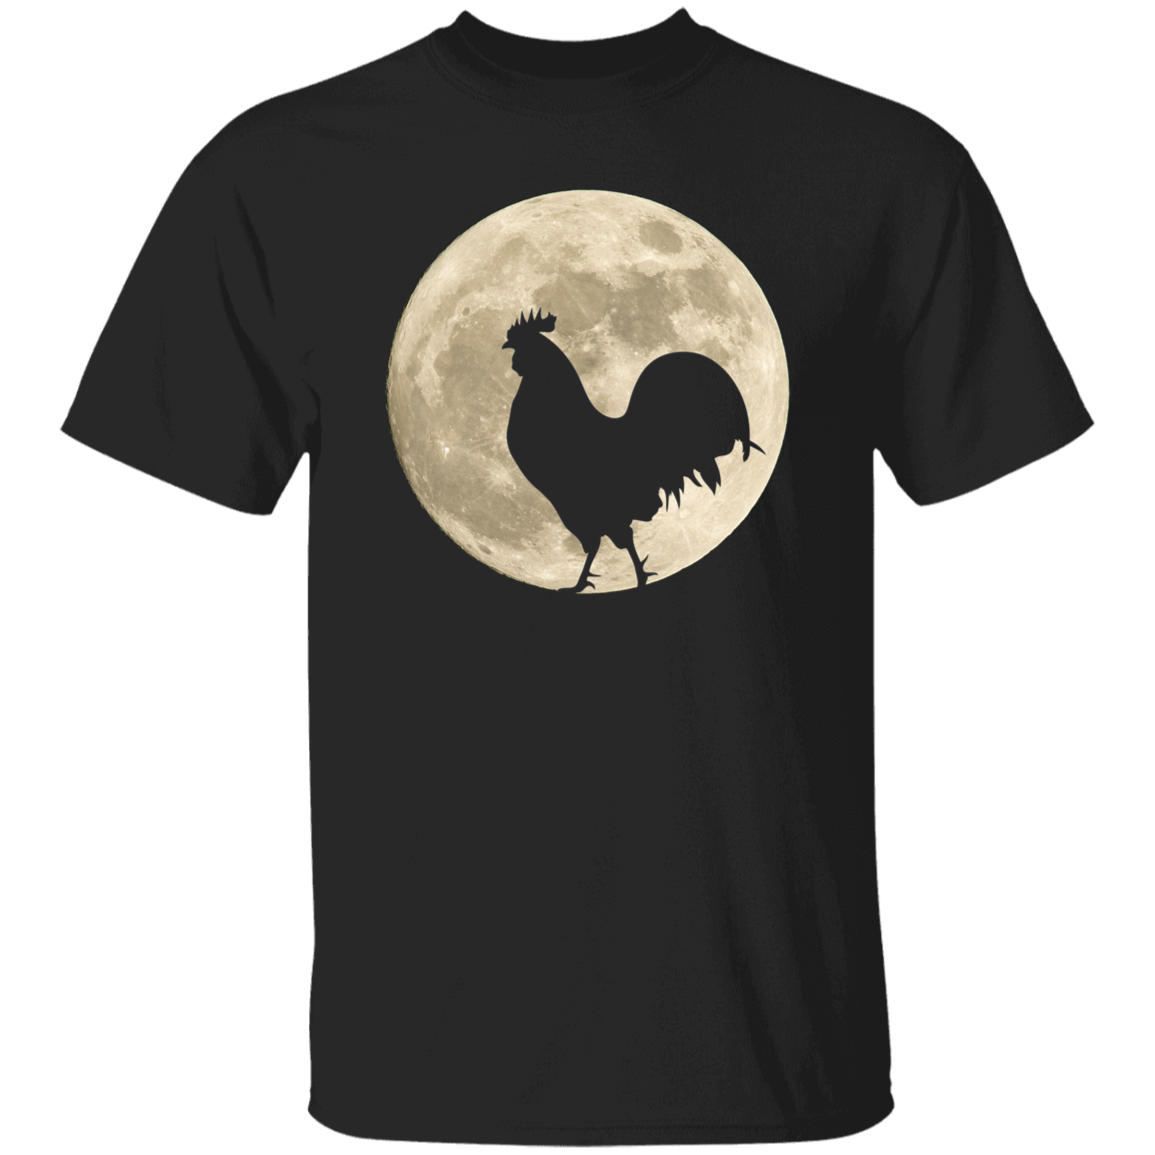 Rooster Moon - T-shirts, Hoodies and Sweatshirts